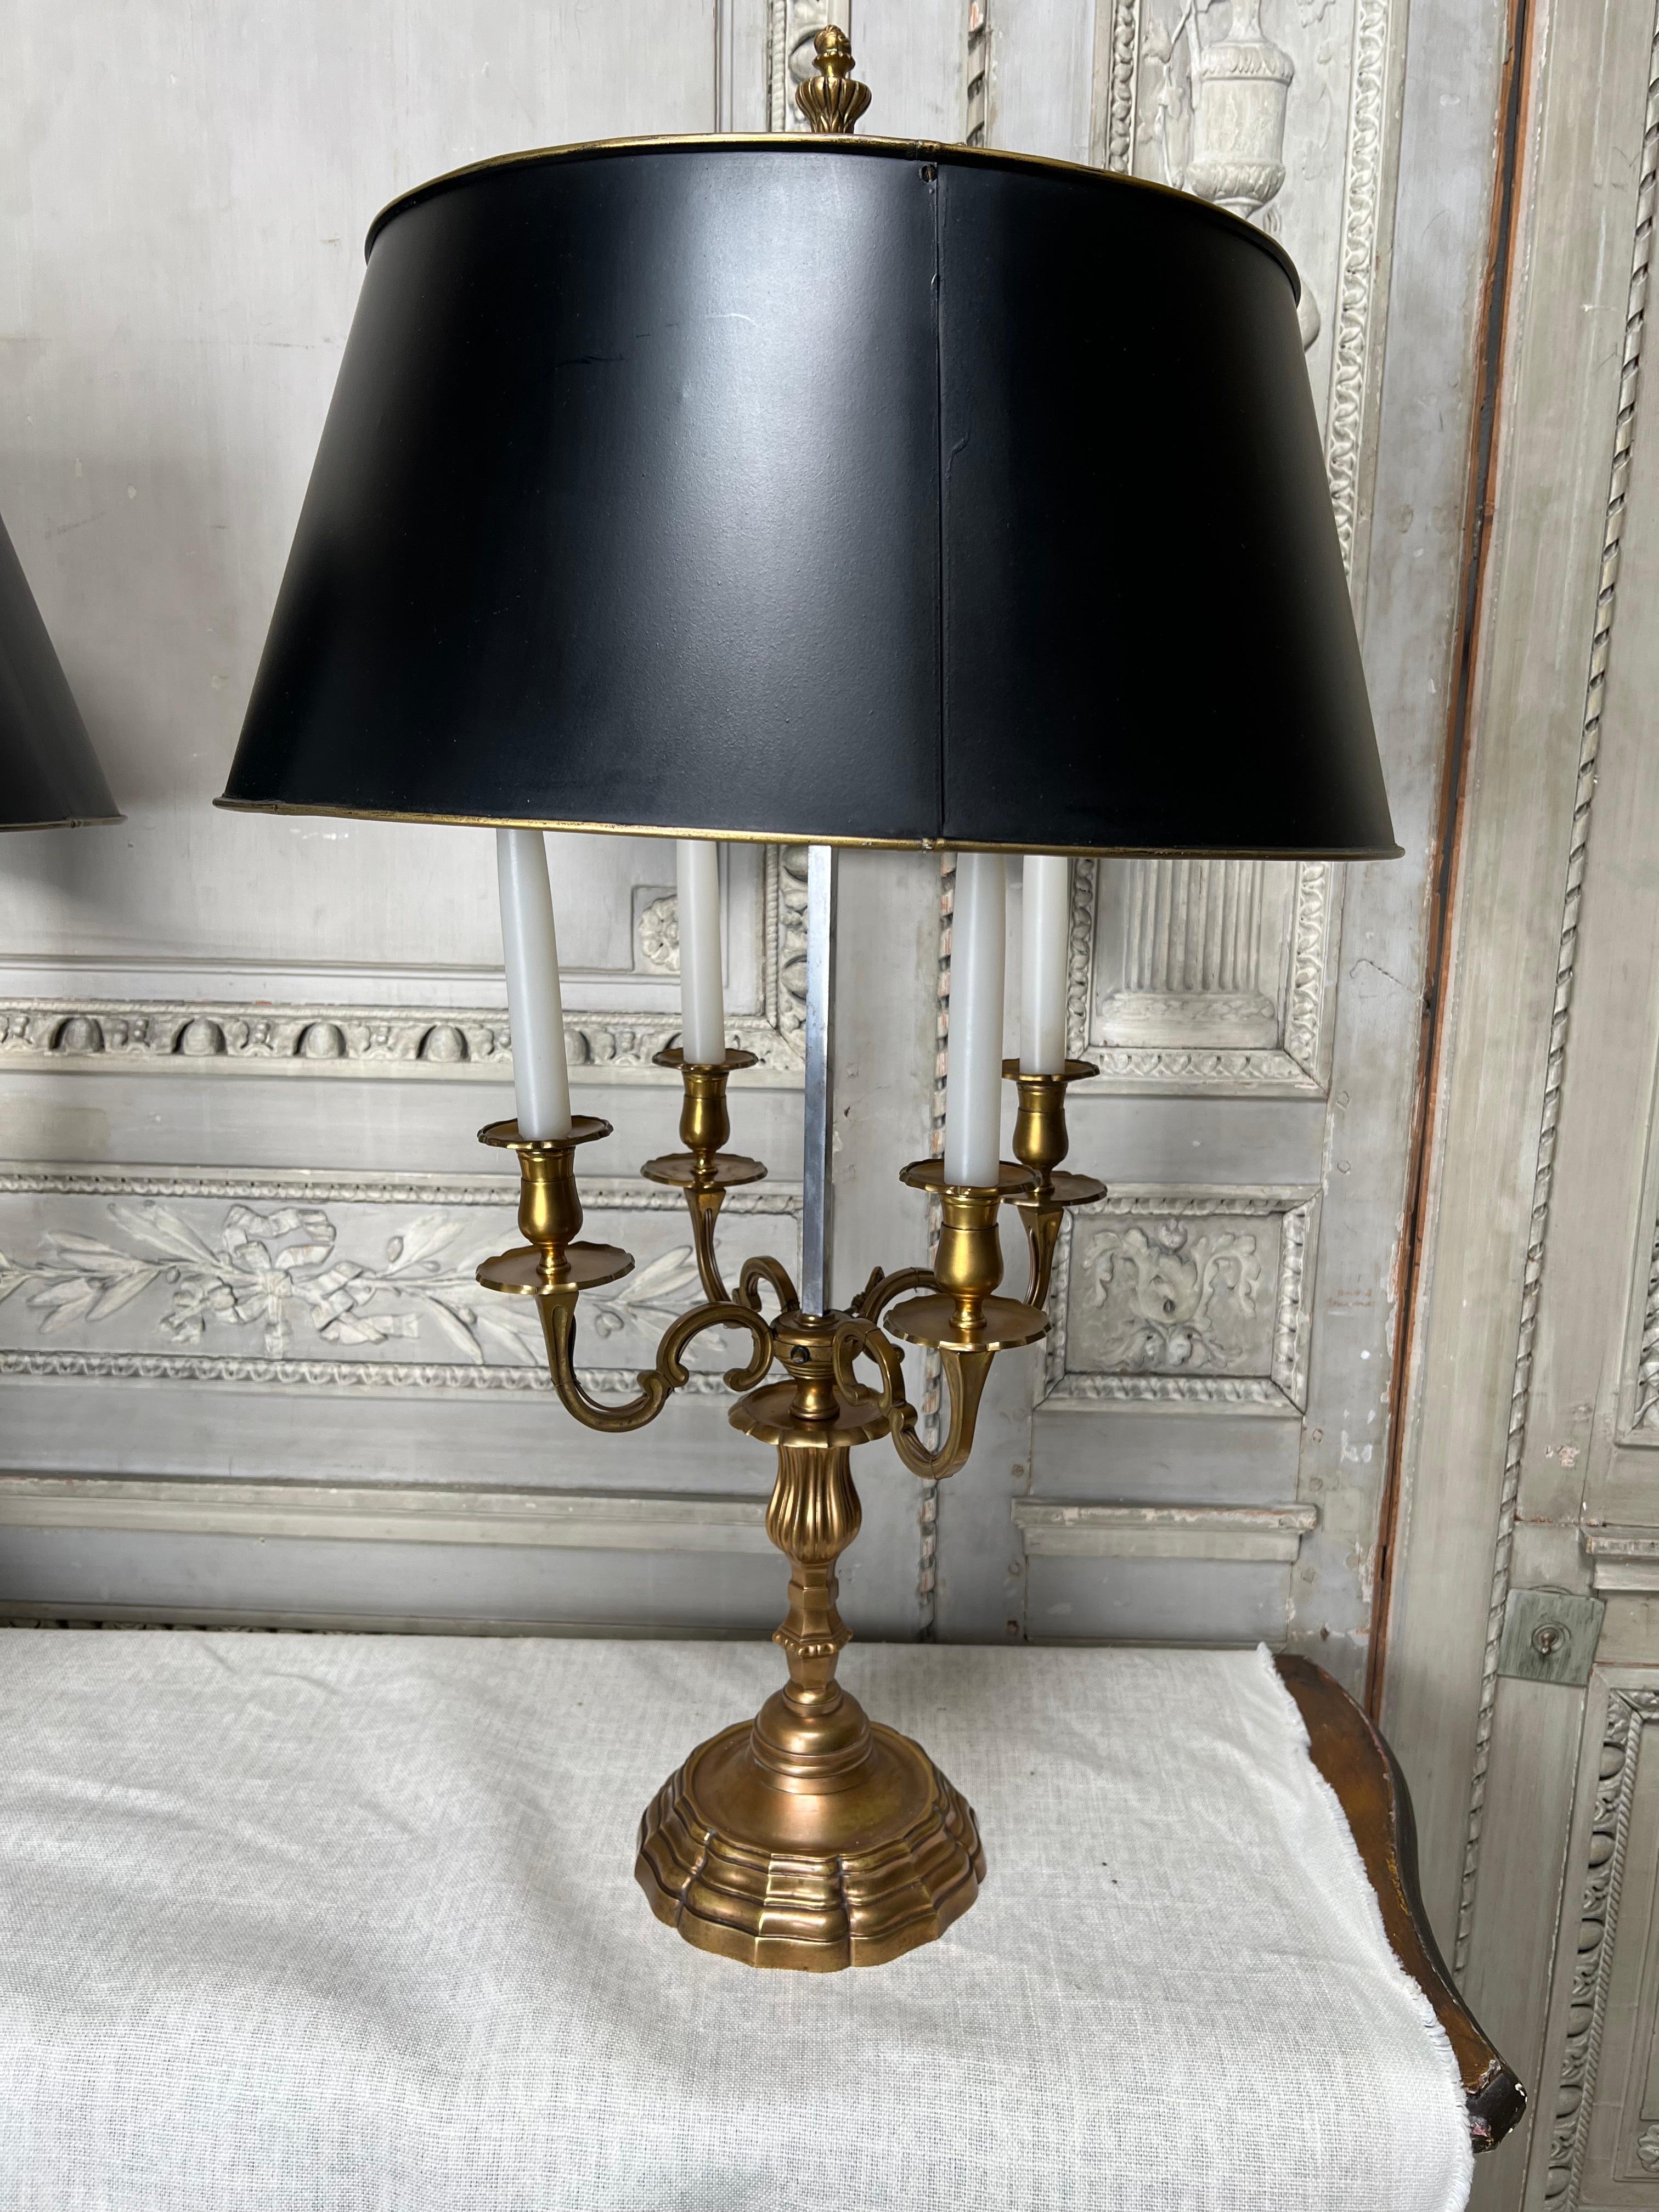 A very large pair of French neoclassical style bouillotte lamps with adjustable tole shades painting in black. These Fine lamps are highly decorative and functional. 
They are currently not wired but can be professionally wired for an additional